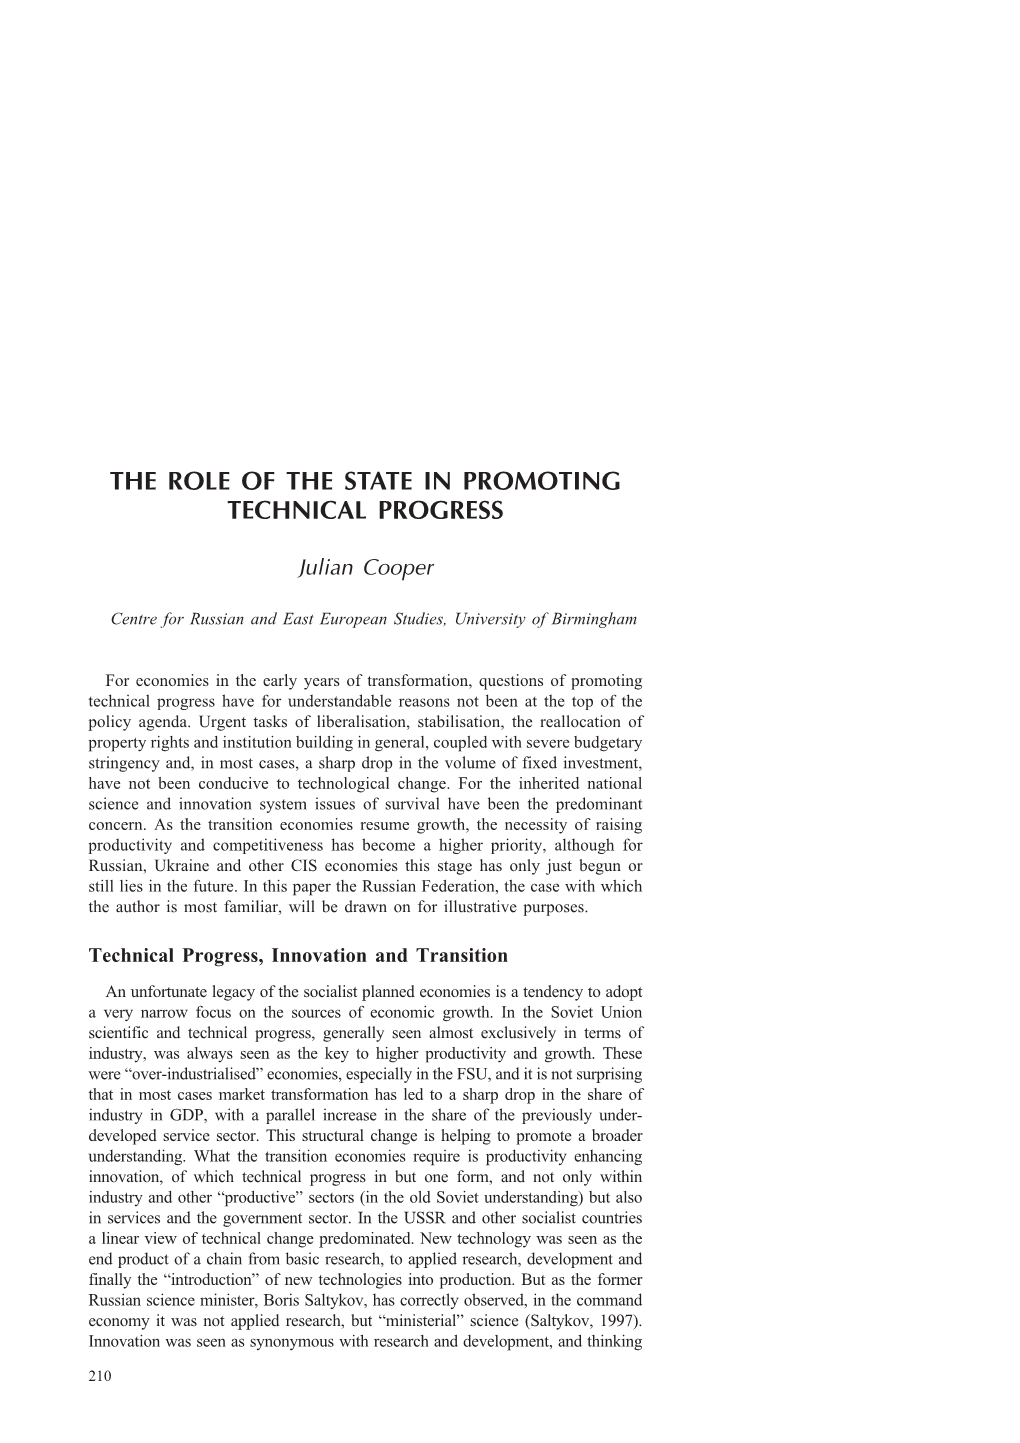 The Role of the State in Promoting Technical Progress